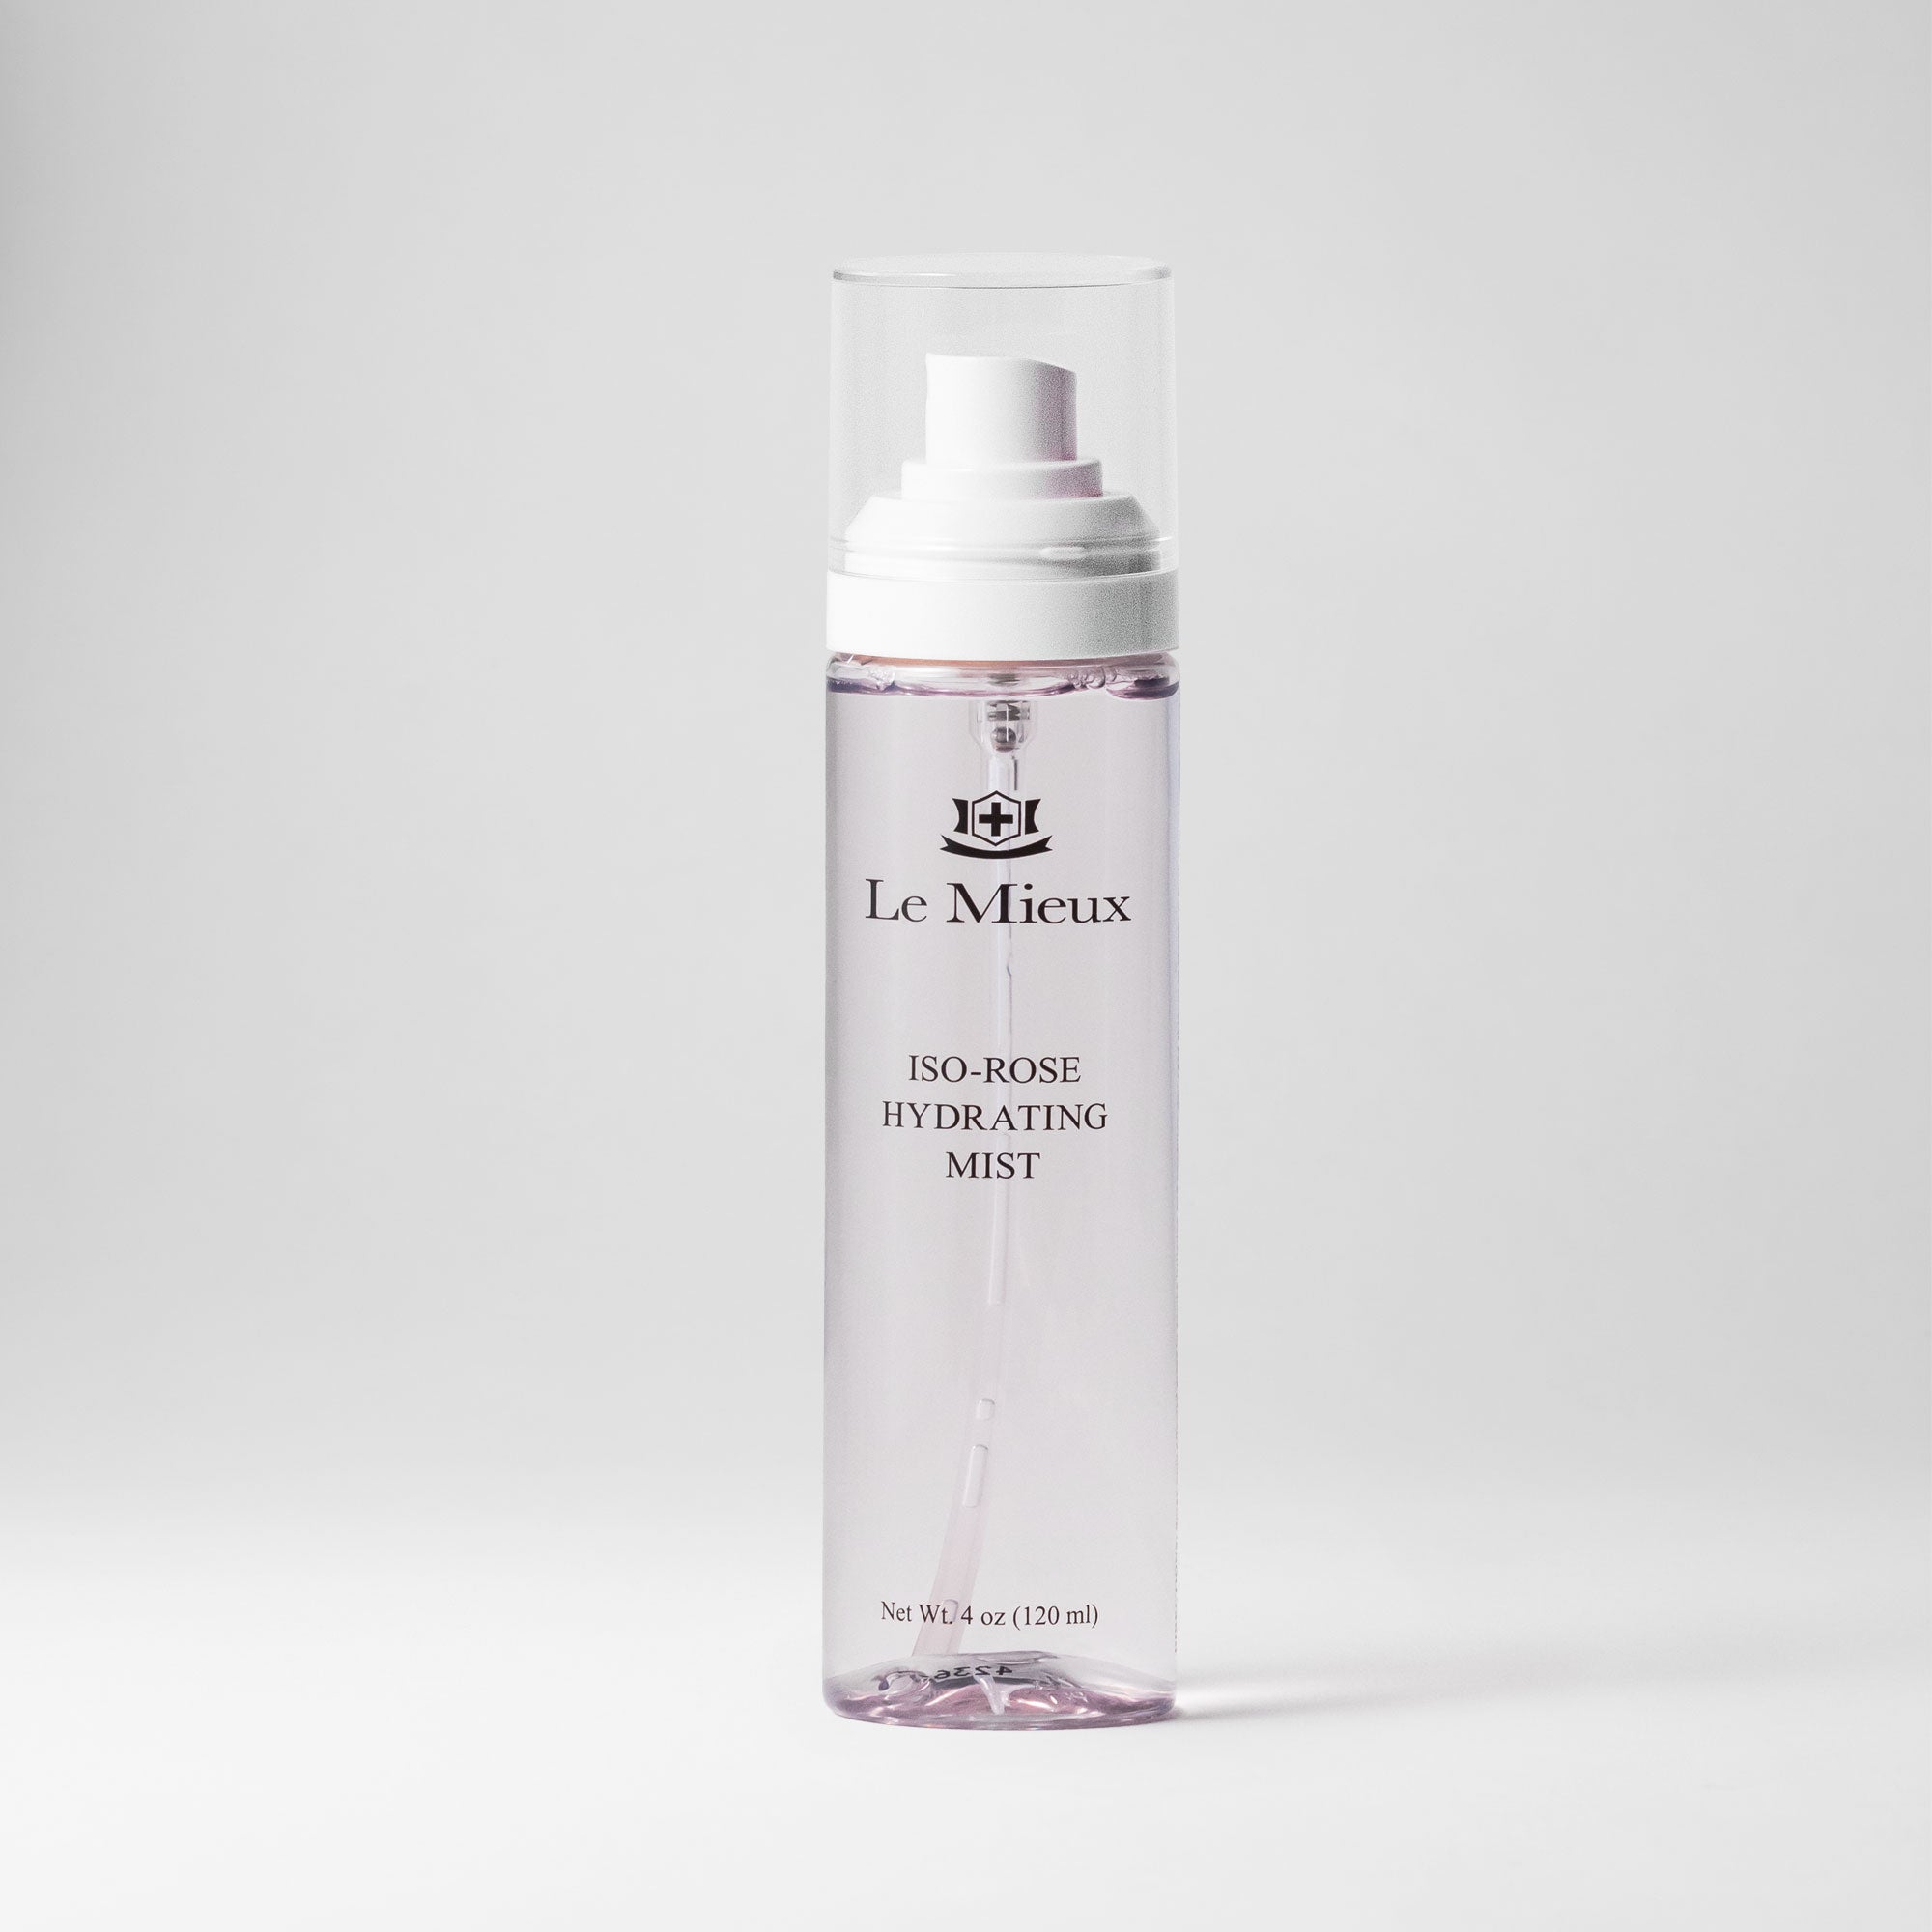  ISO-ROSE HYDRATING MIST from Le Mieux Skincare - 1